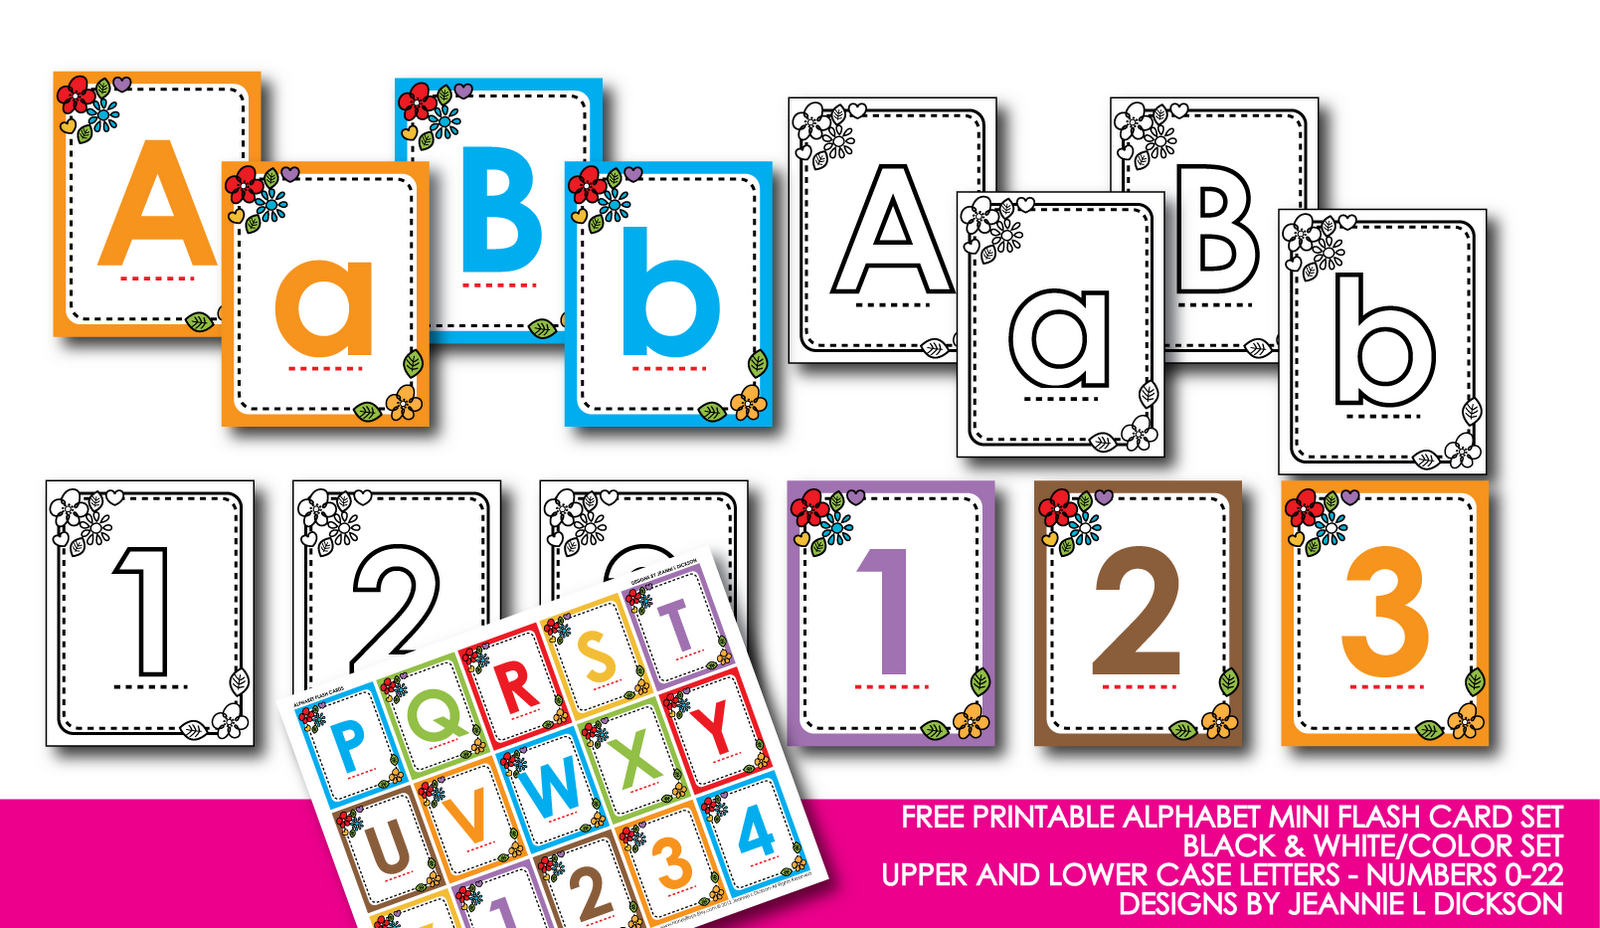 6 Best Images Of Free Printable The Whole Flash Cards Alphabet Preschool Free Printable